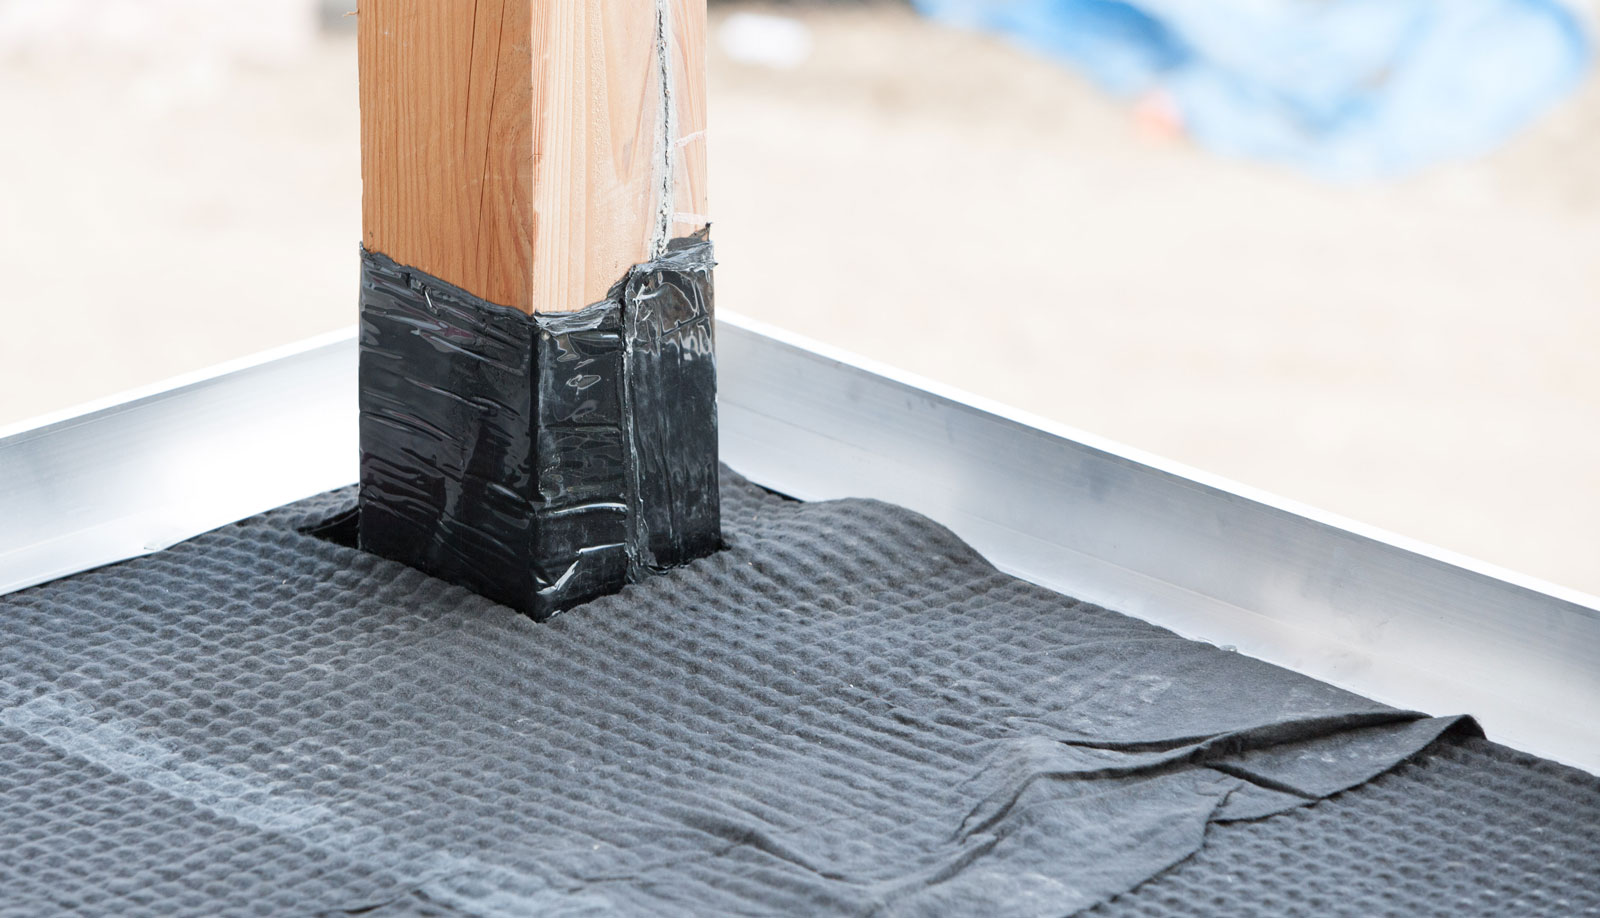 TAMKO Introduces TW-Drain 220 For Above Grade Waterproofing